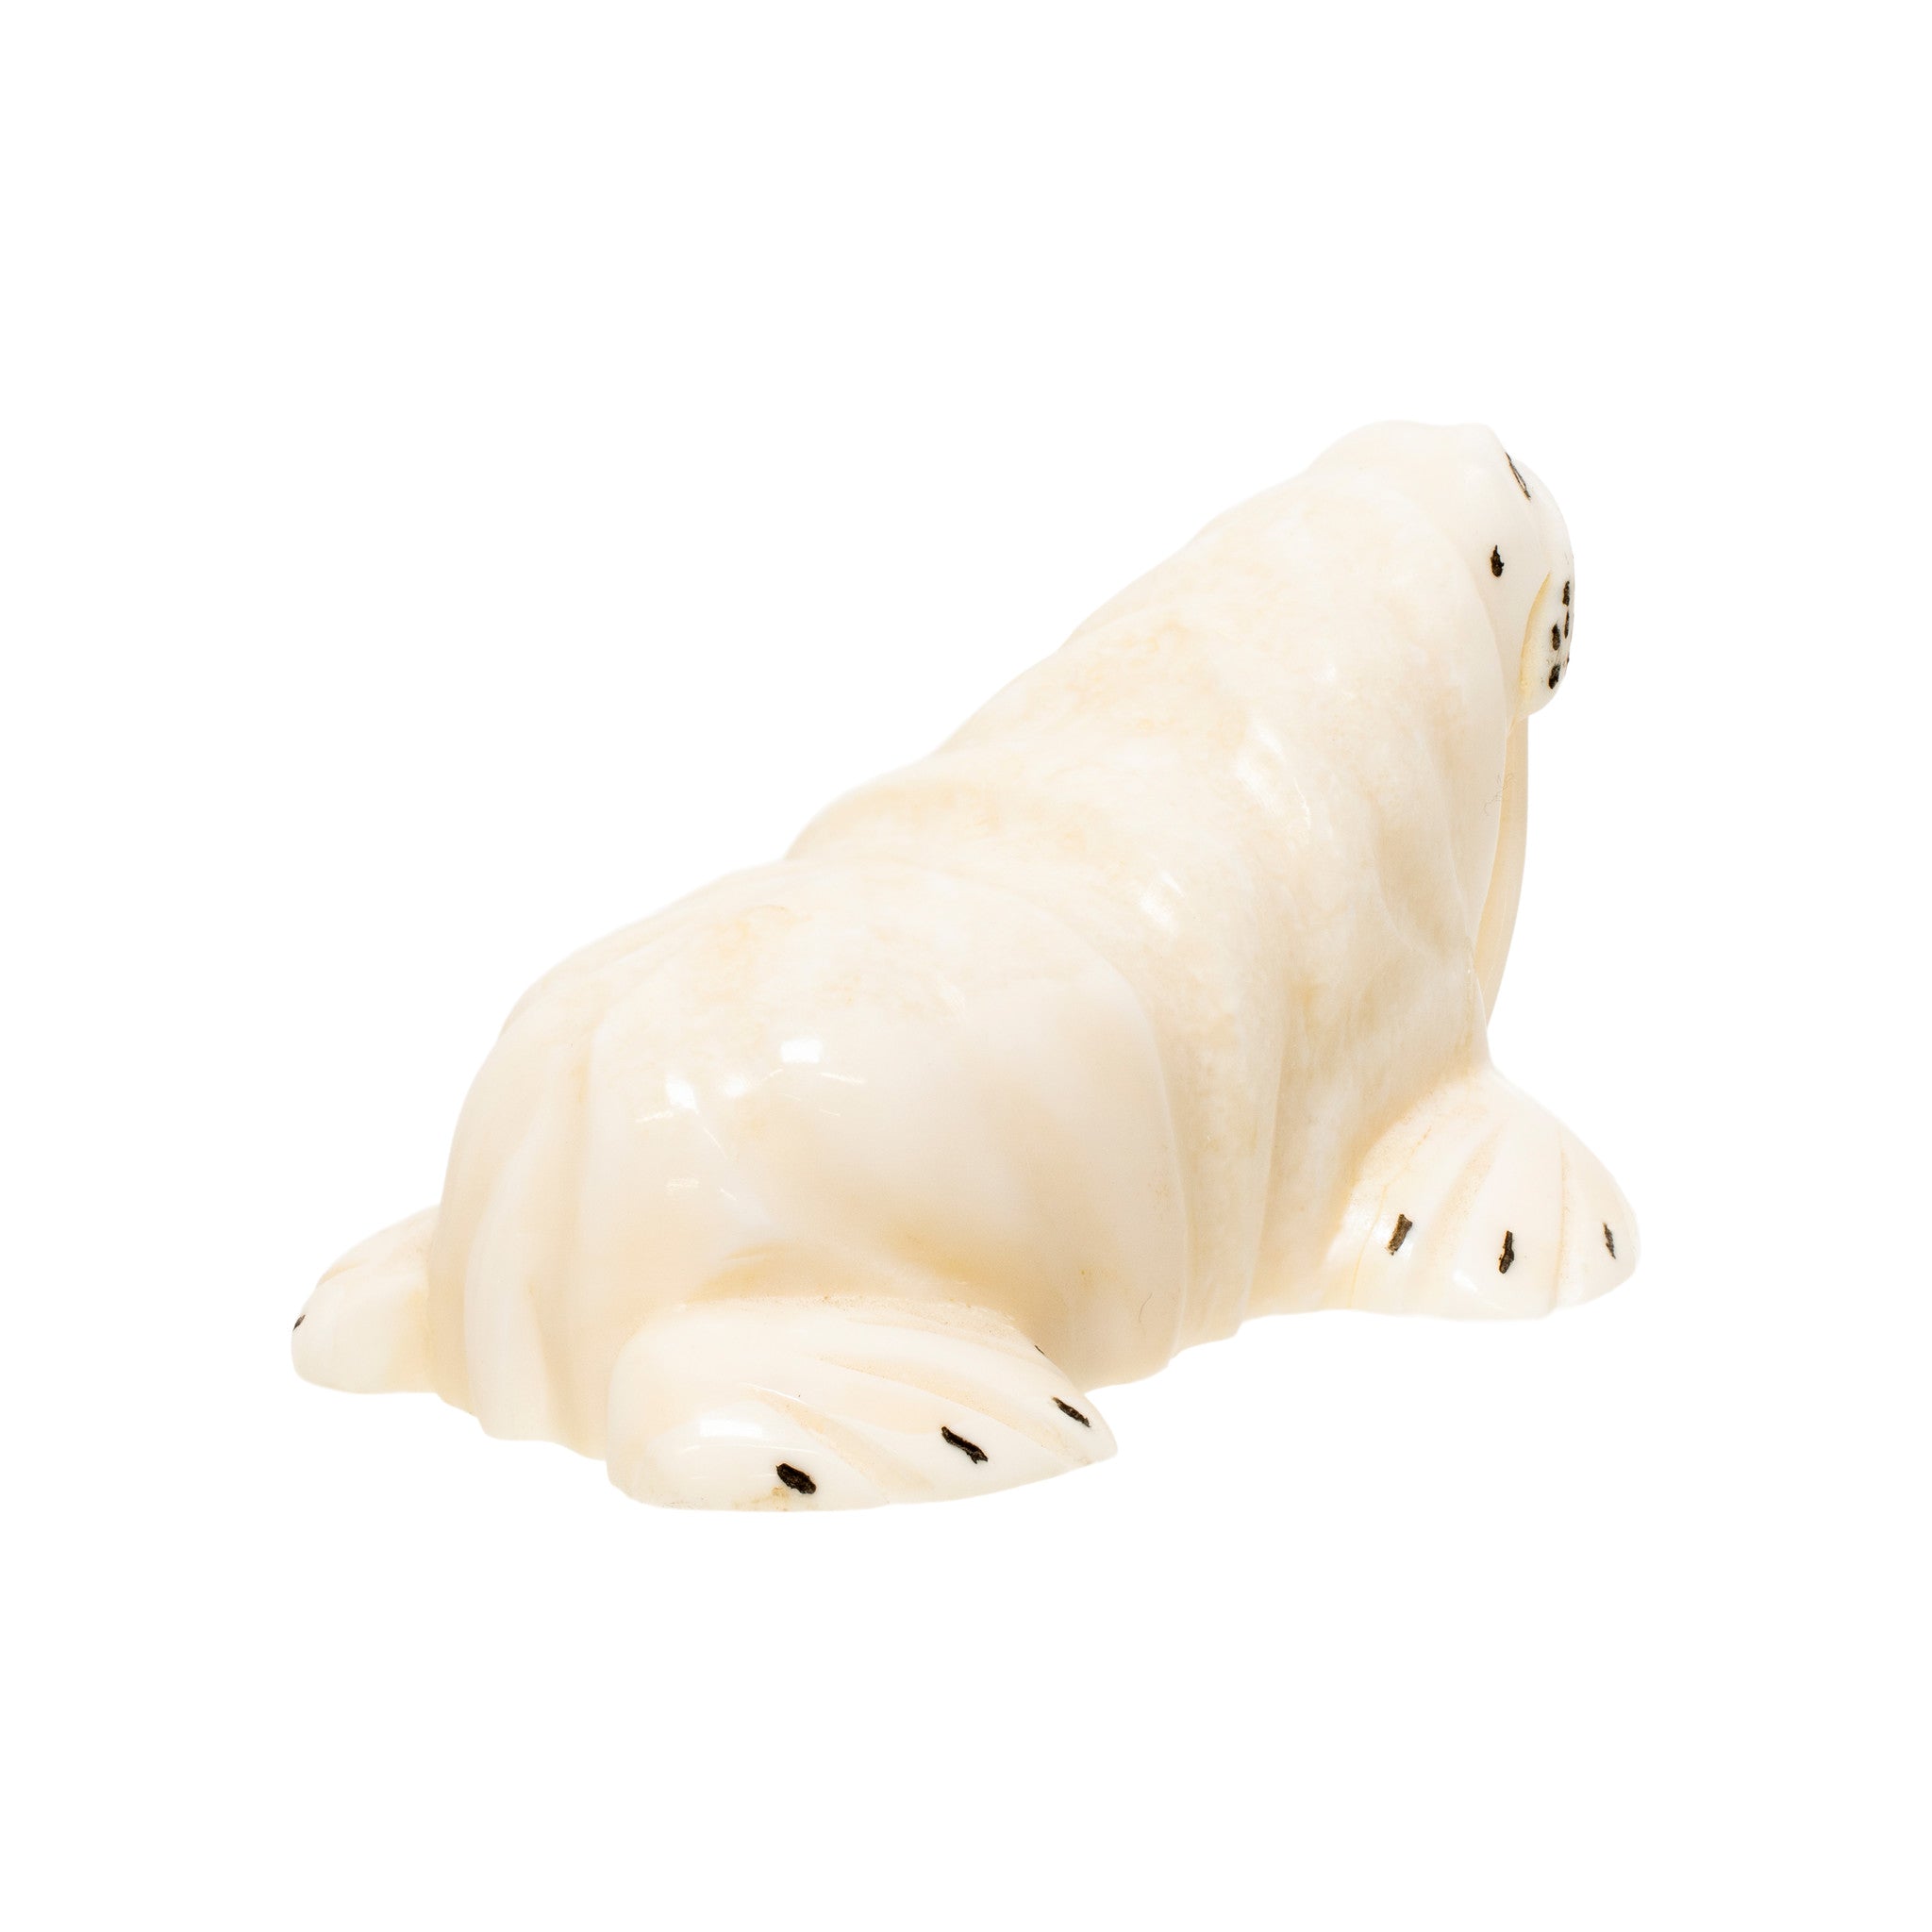 Inuit Carved Walrus